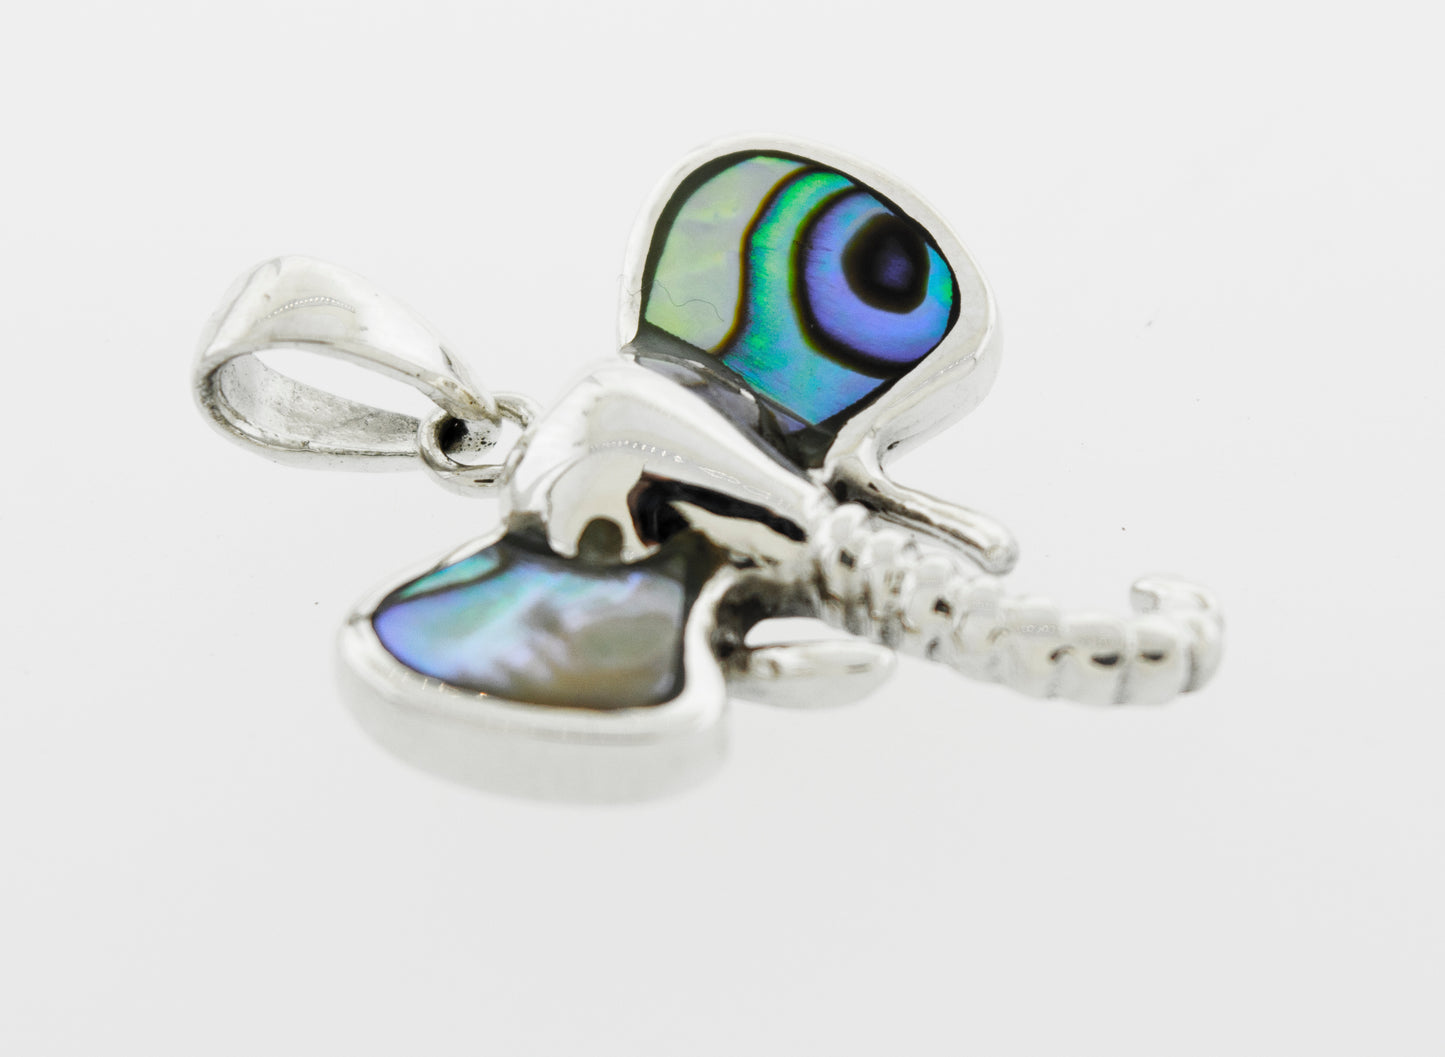 A Super Silver elephant head pendant with inlaid stone ears and blue and green eyes.